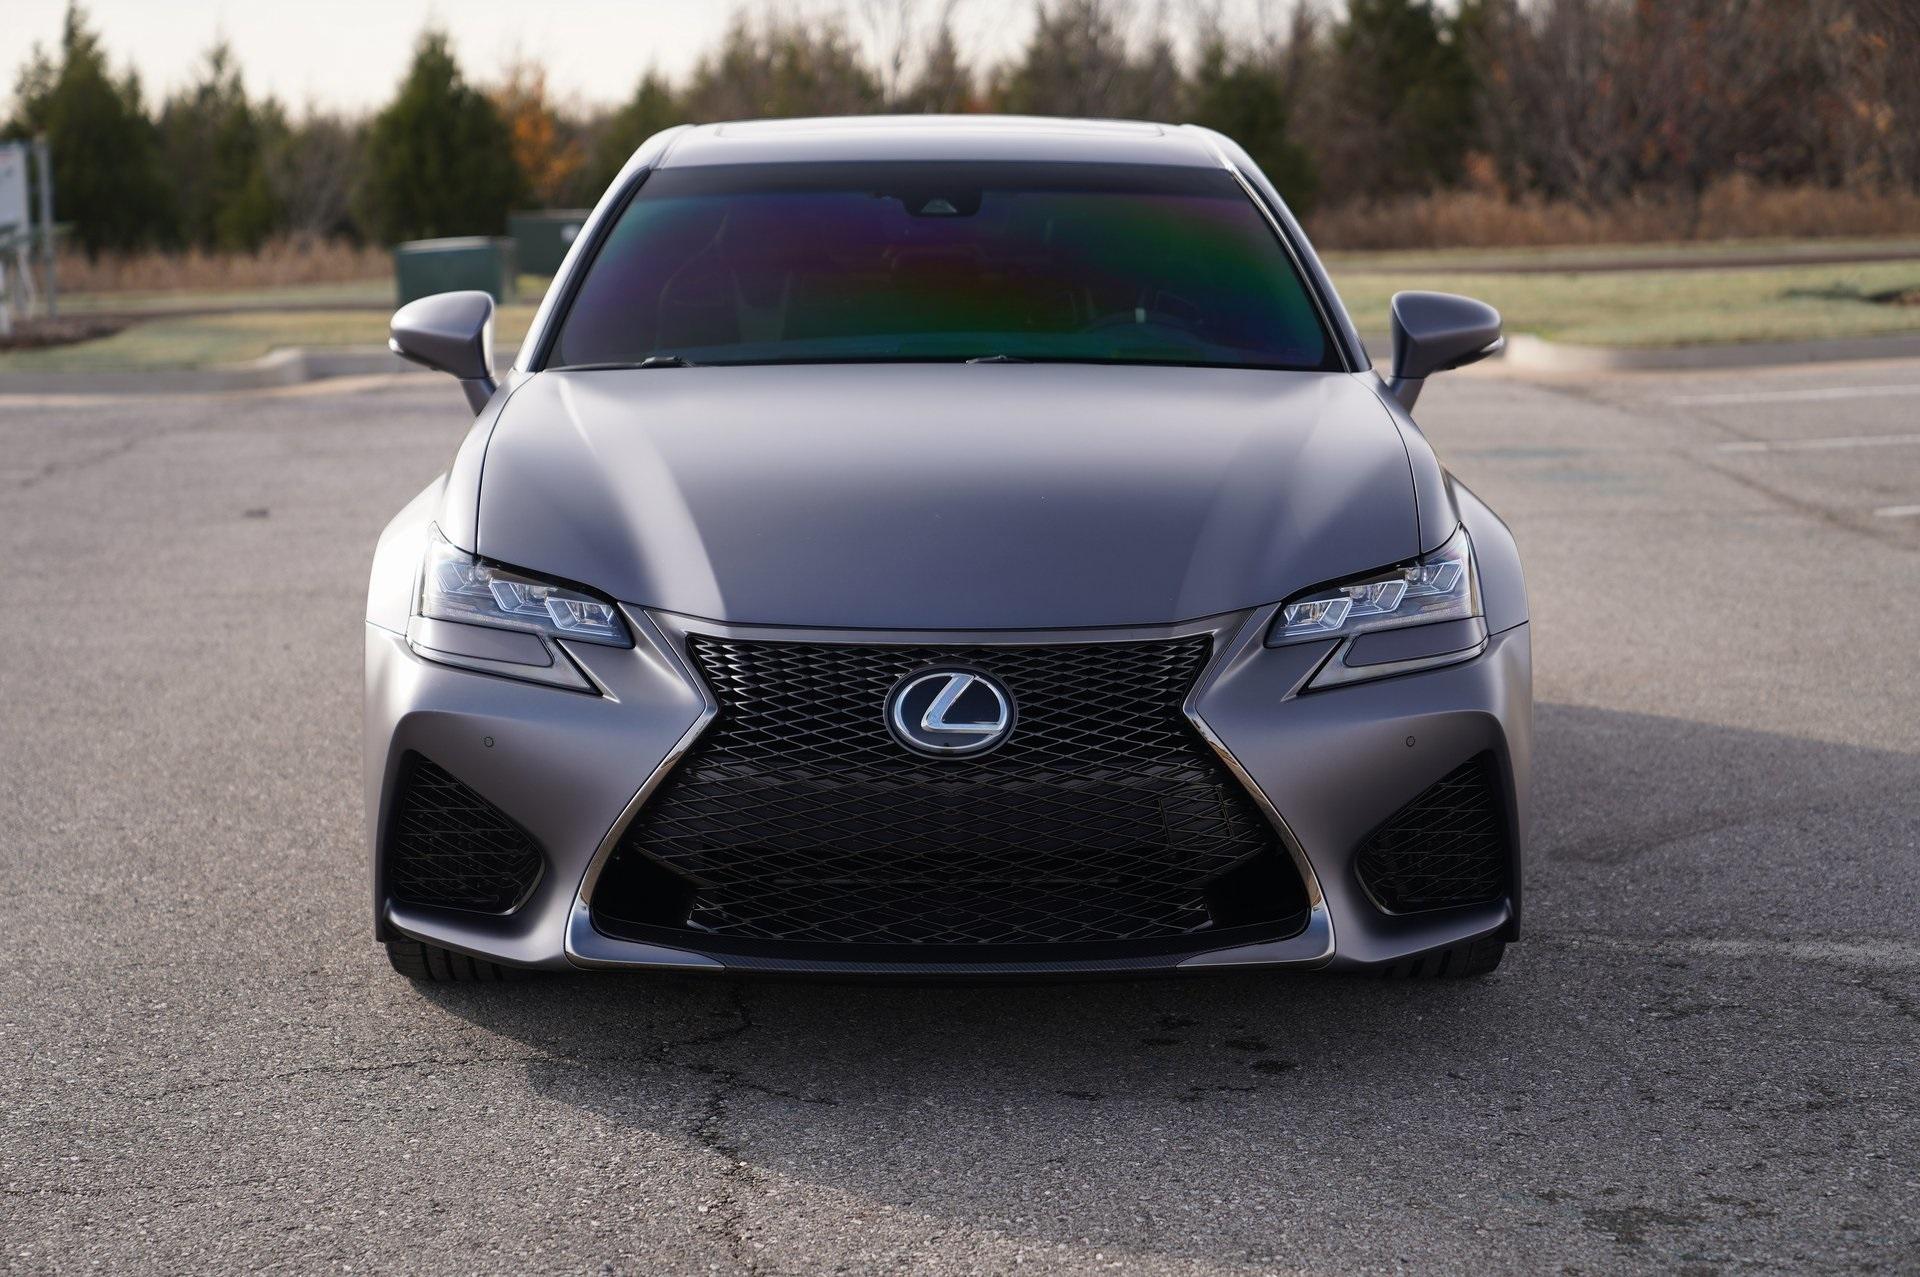 Used 2019 Lexus GS F 10th anniversary edition For Sale ($70,995) | Exotic  Motorsports of Oklahoma Stock #C963